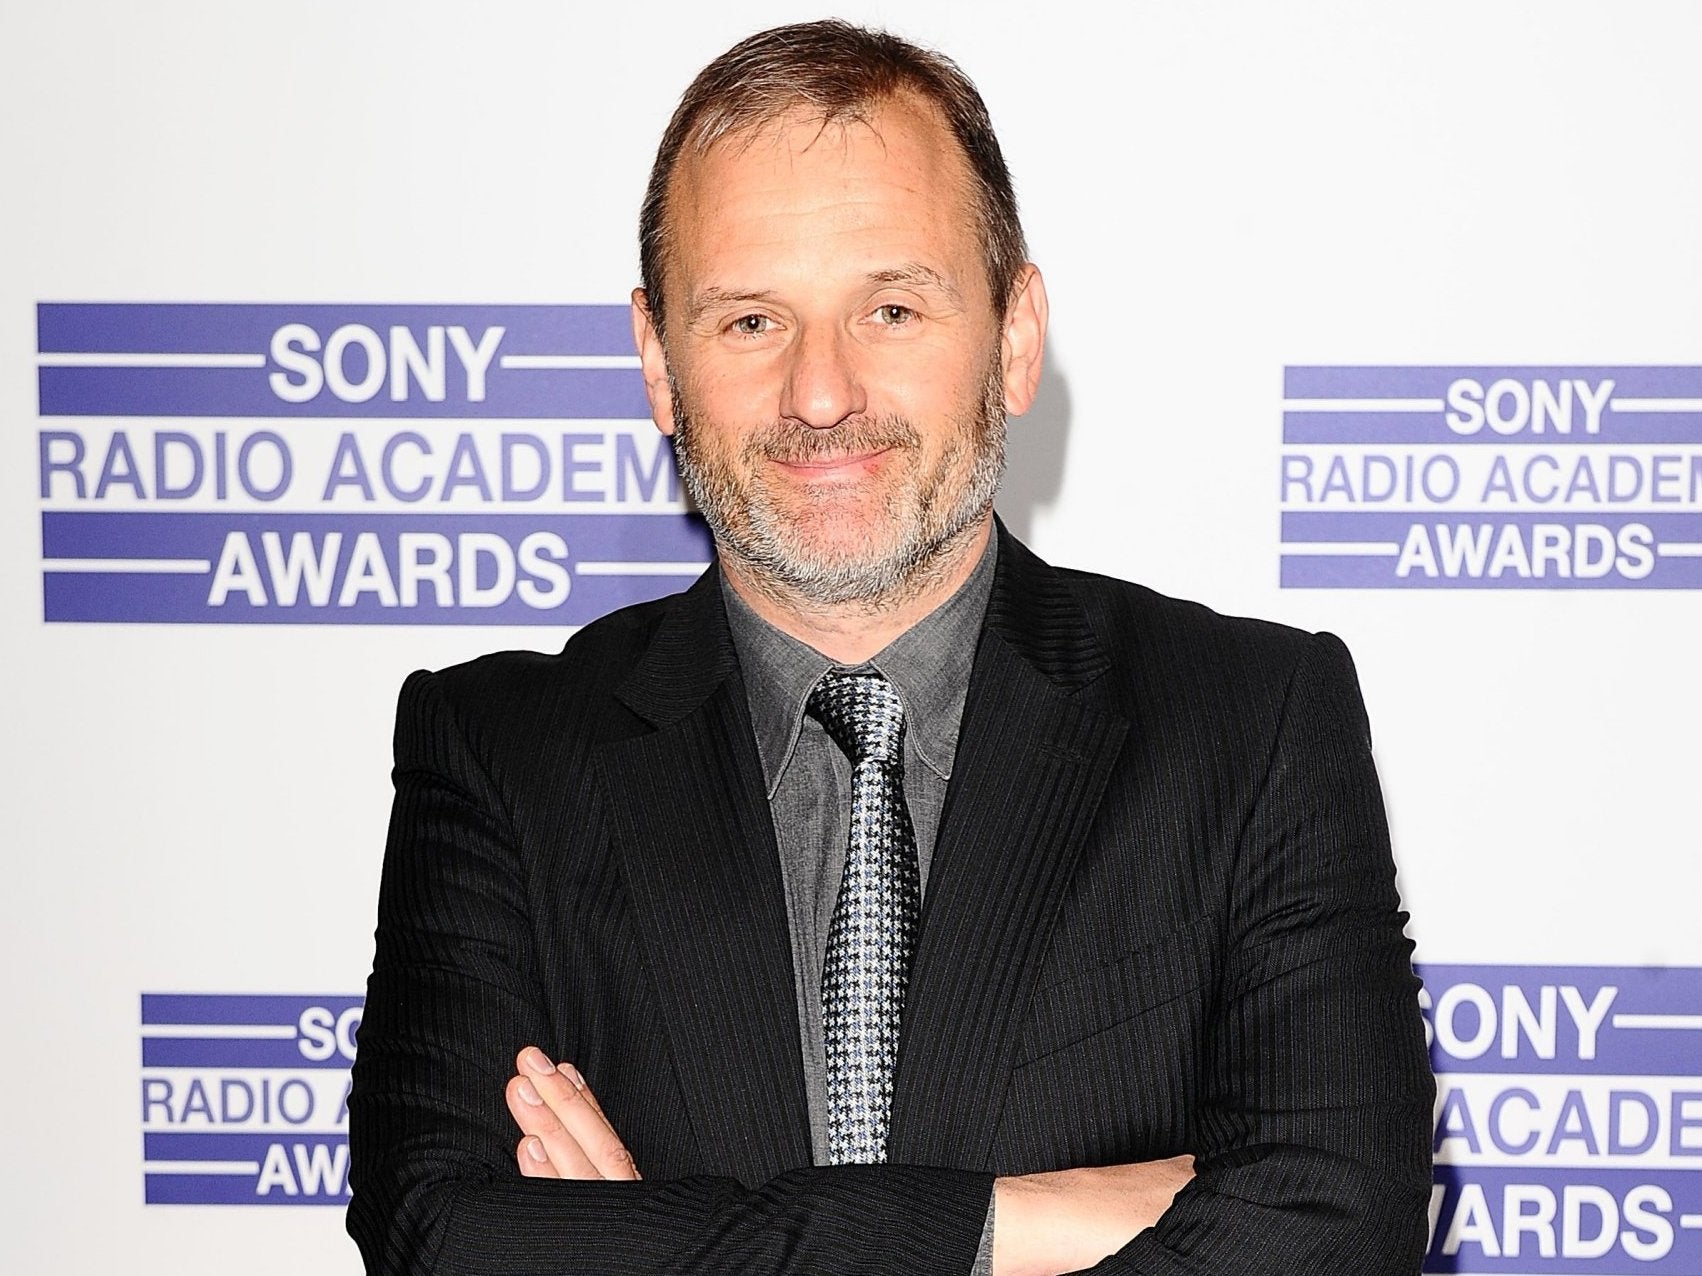 Mark Radcliffe will take some time away from his radio shows while he receives treatment for cancer